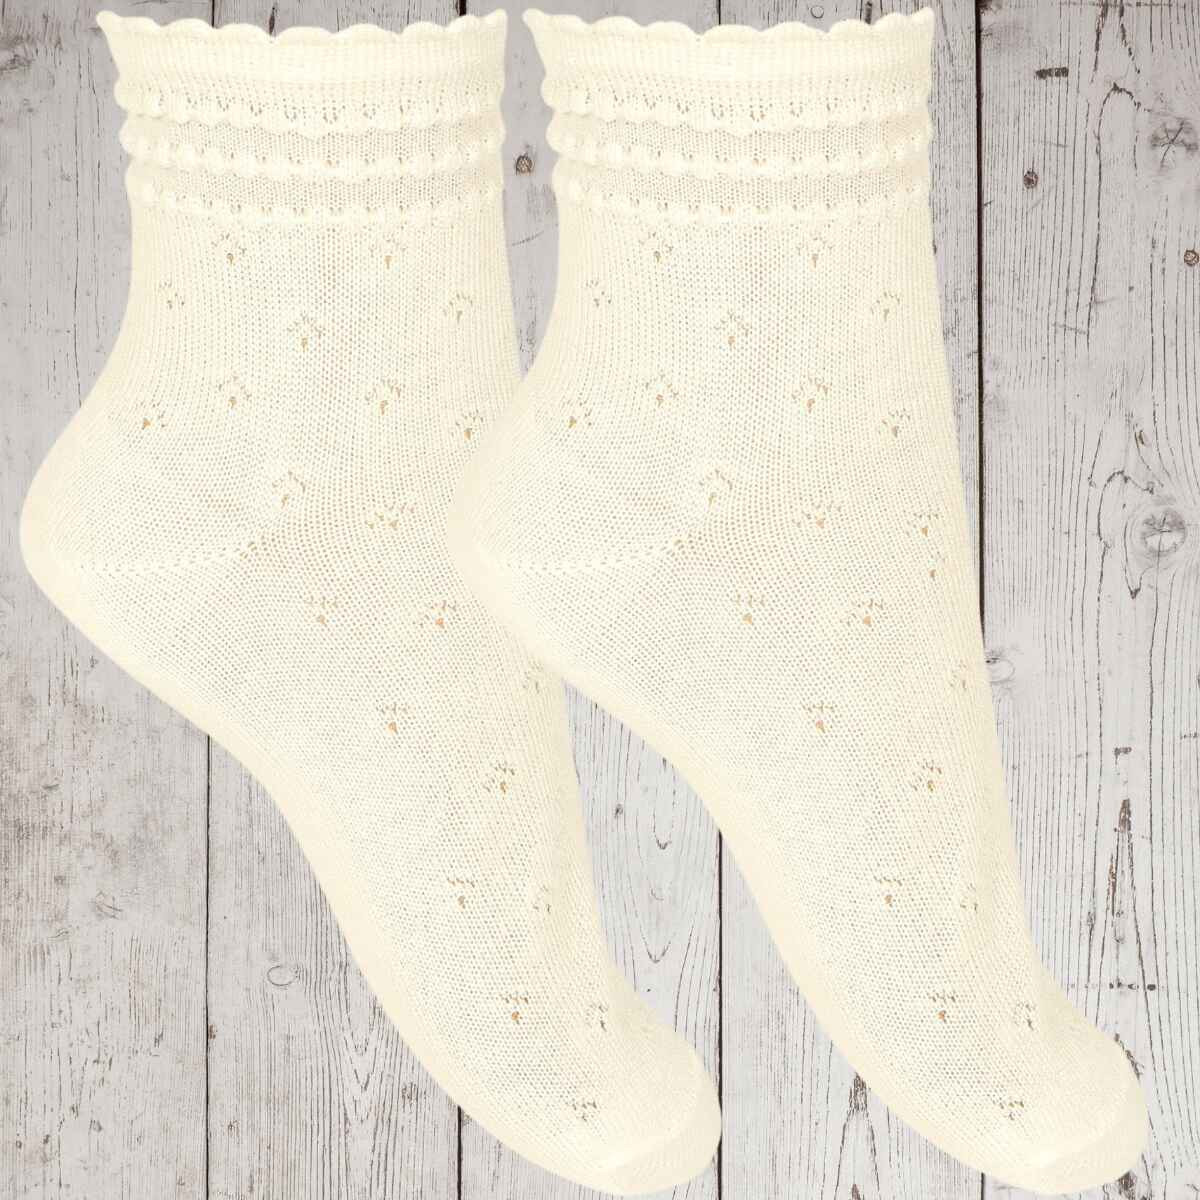 CEREMONY ANKLE SOCKS WITH RELIEF BORDER CONDOR - 4